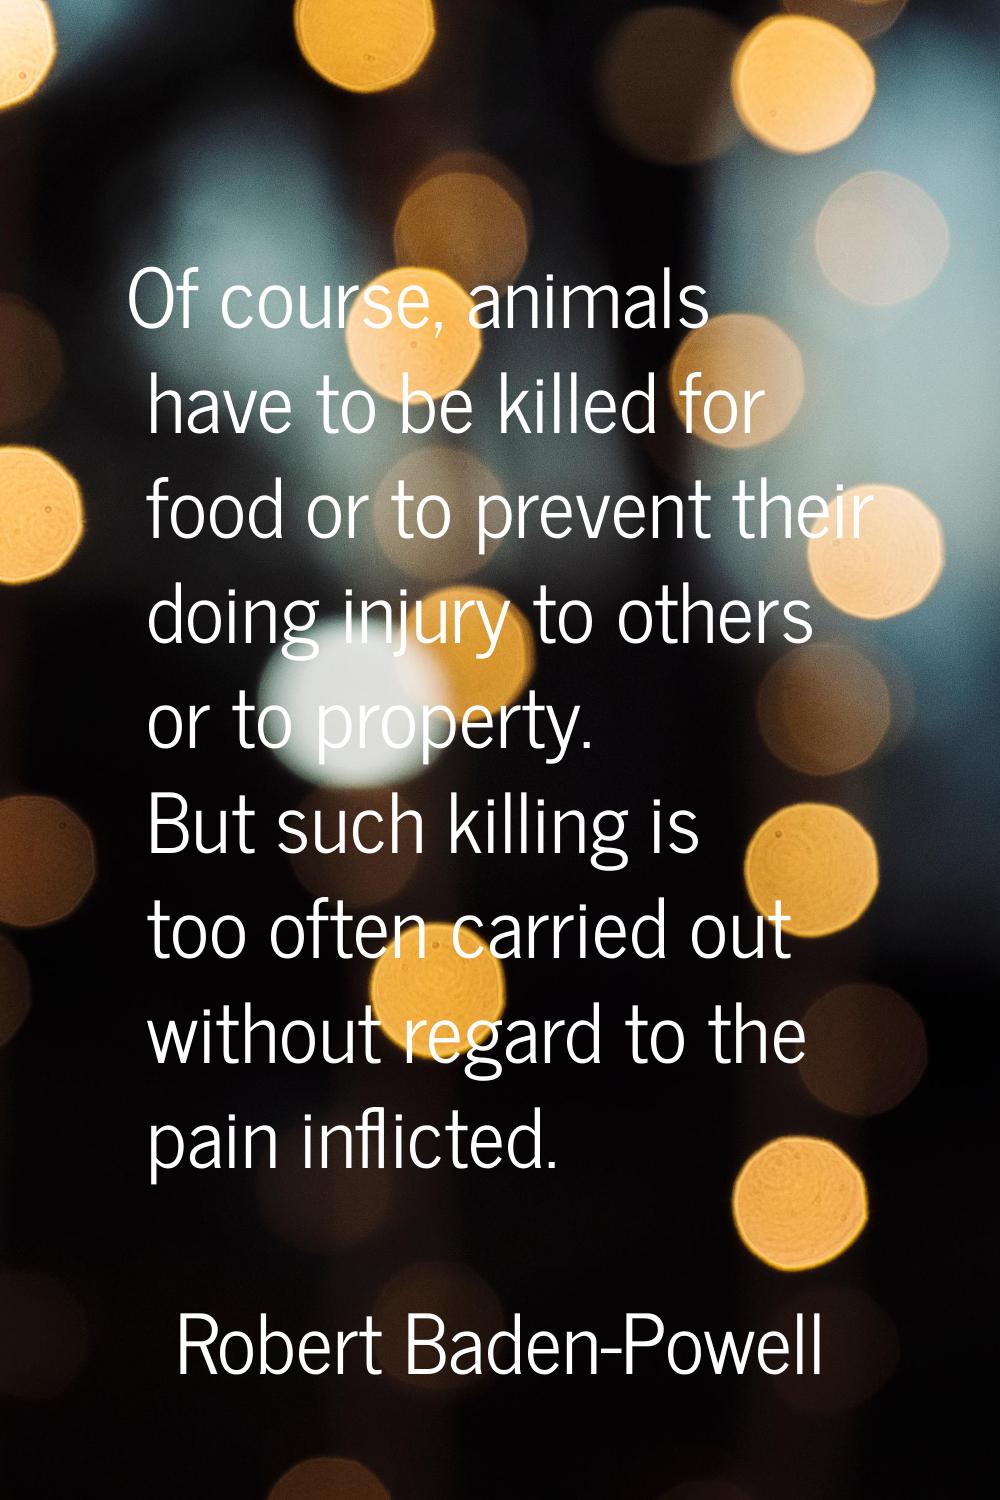 Of course, animals have to be killed for food or to prevent their doing injury to others or to prop